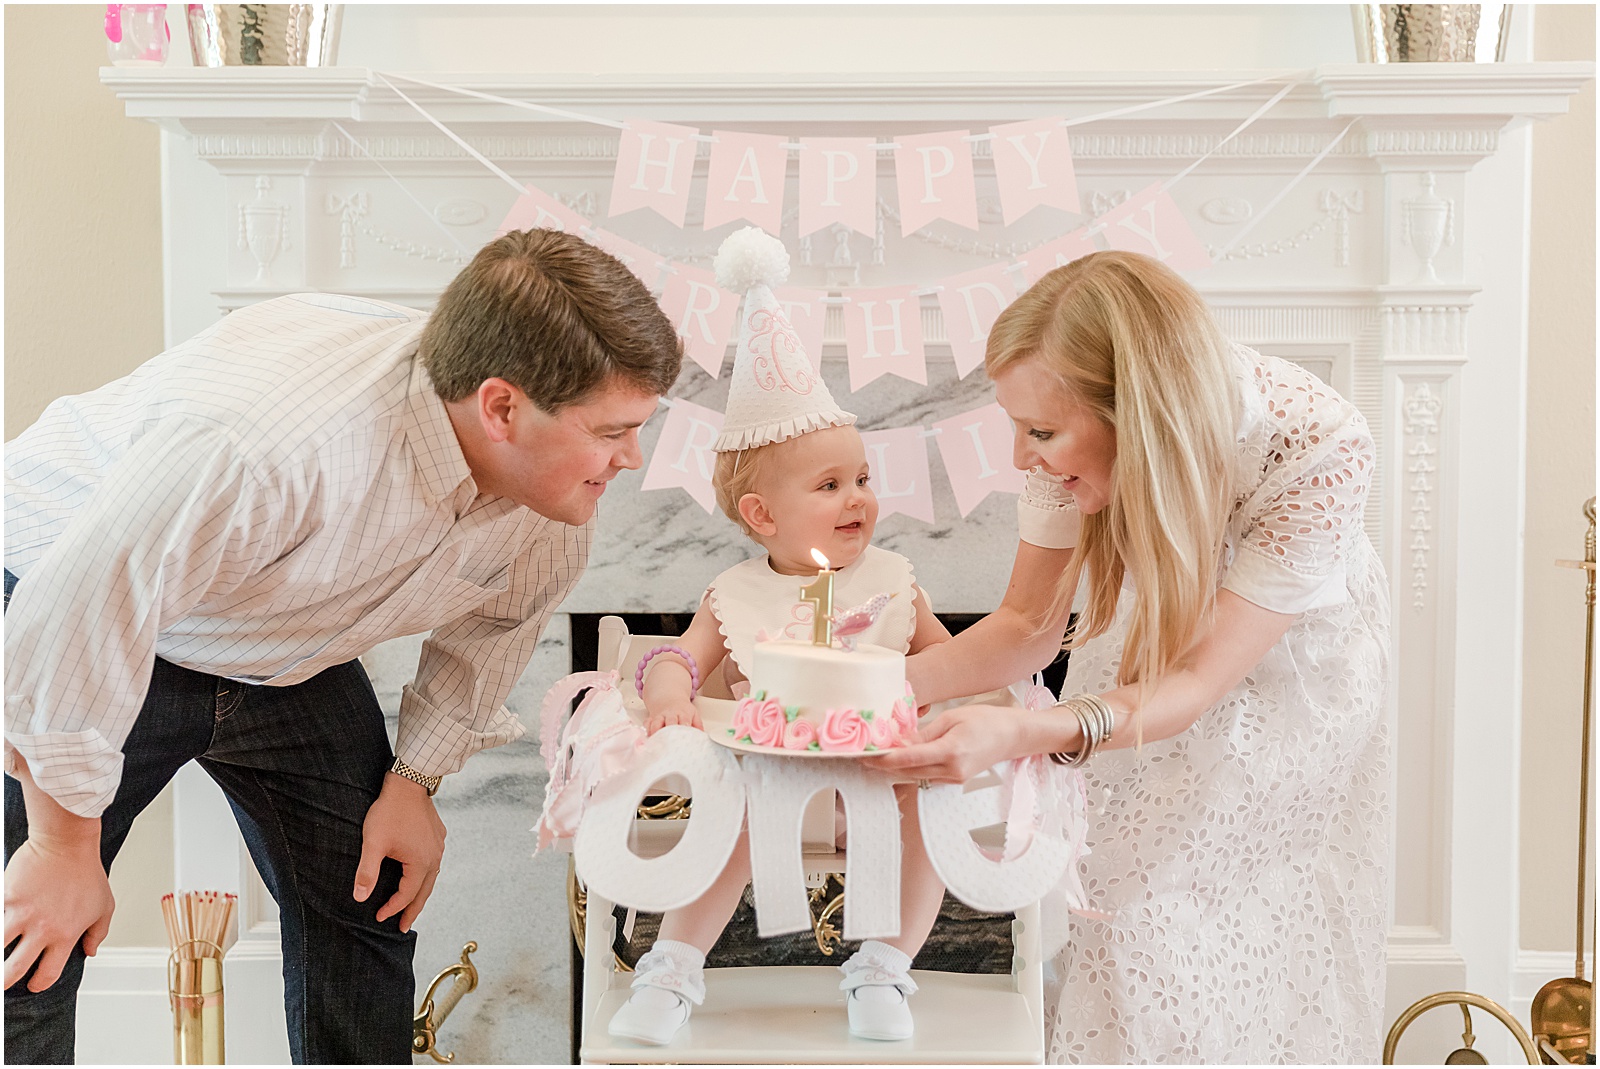 Greenville, first birthday photos, Little Happies birthday banner, pink and white birthday party